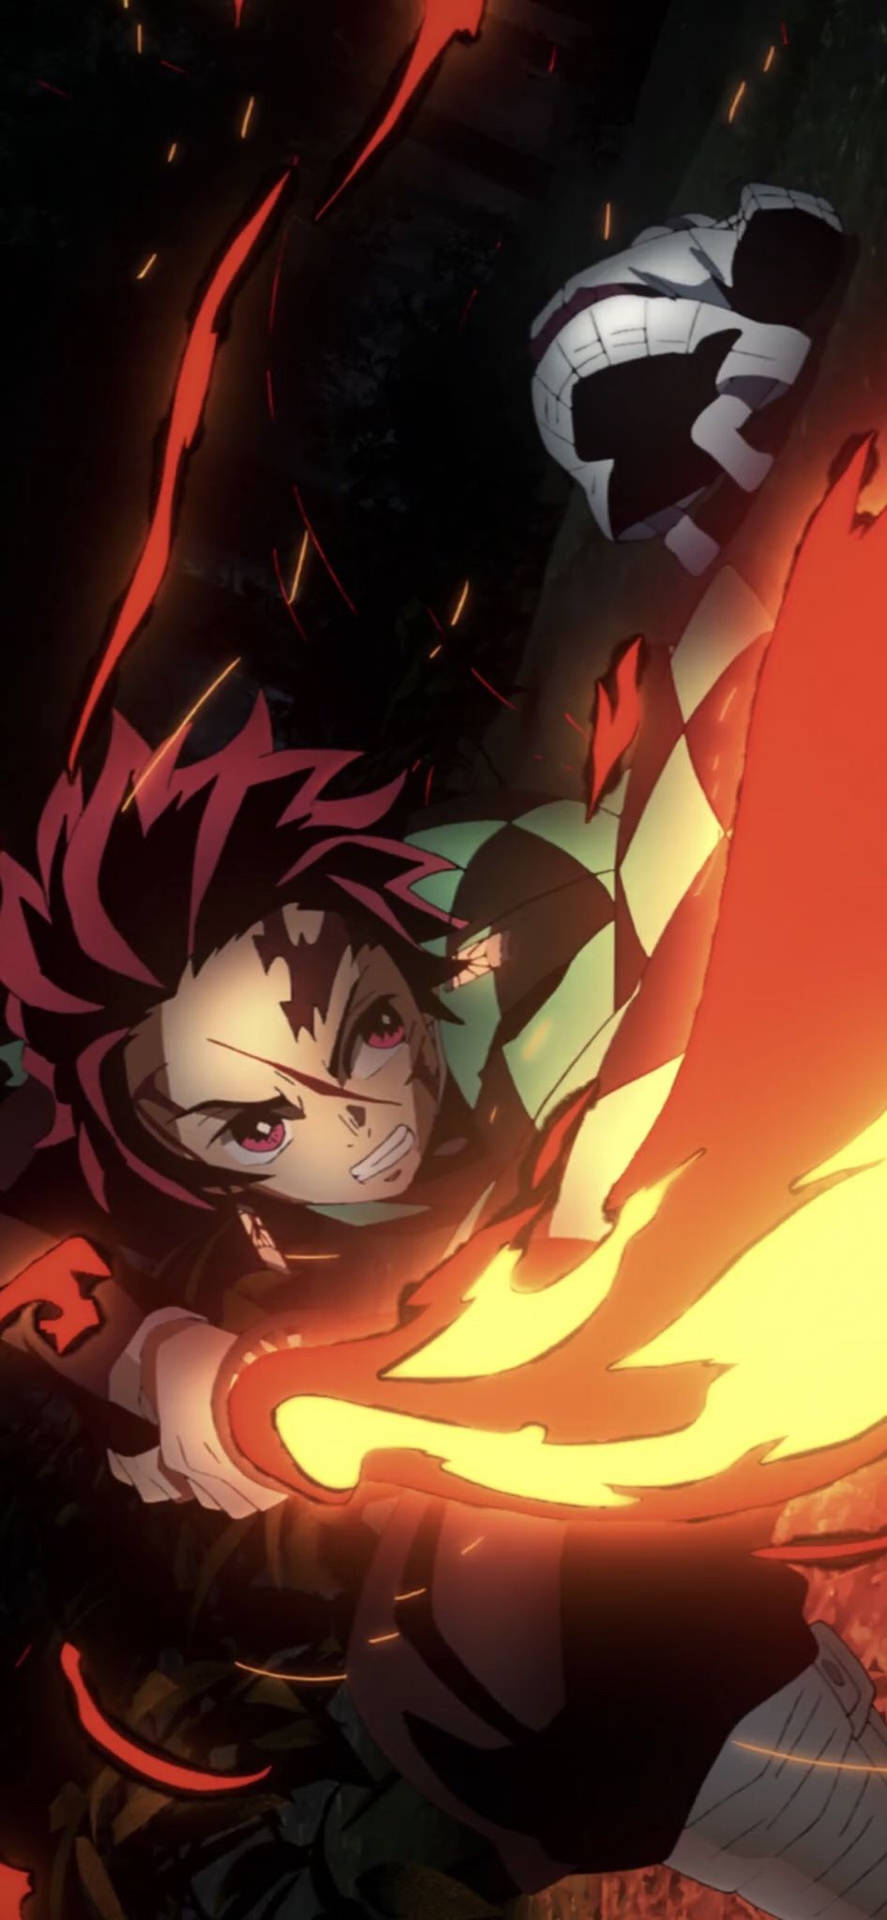 Tanjiro unleashes his fire breathing technique Wallpaper